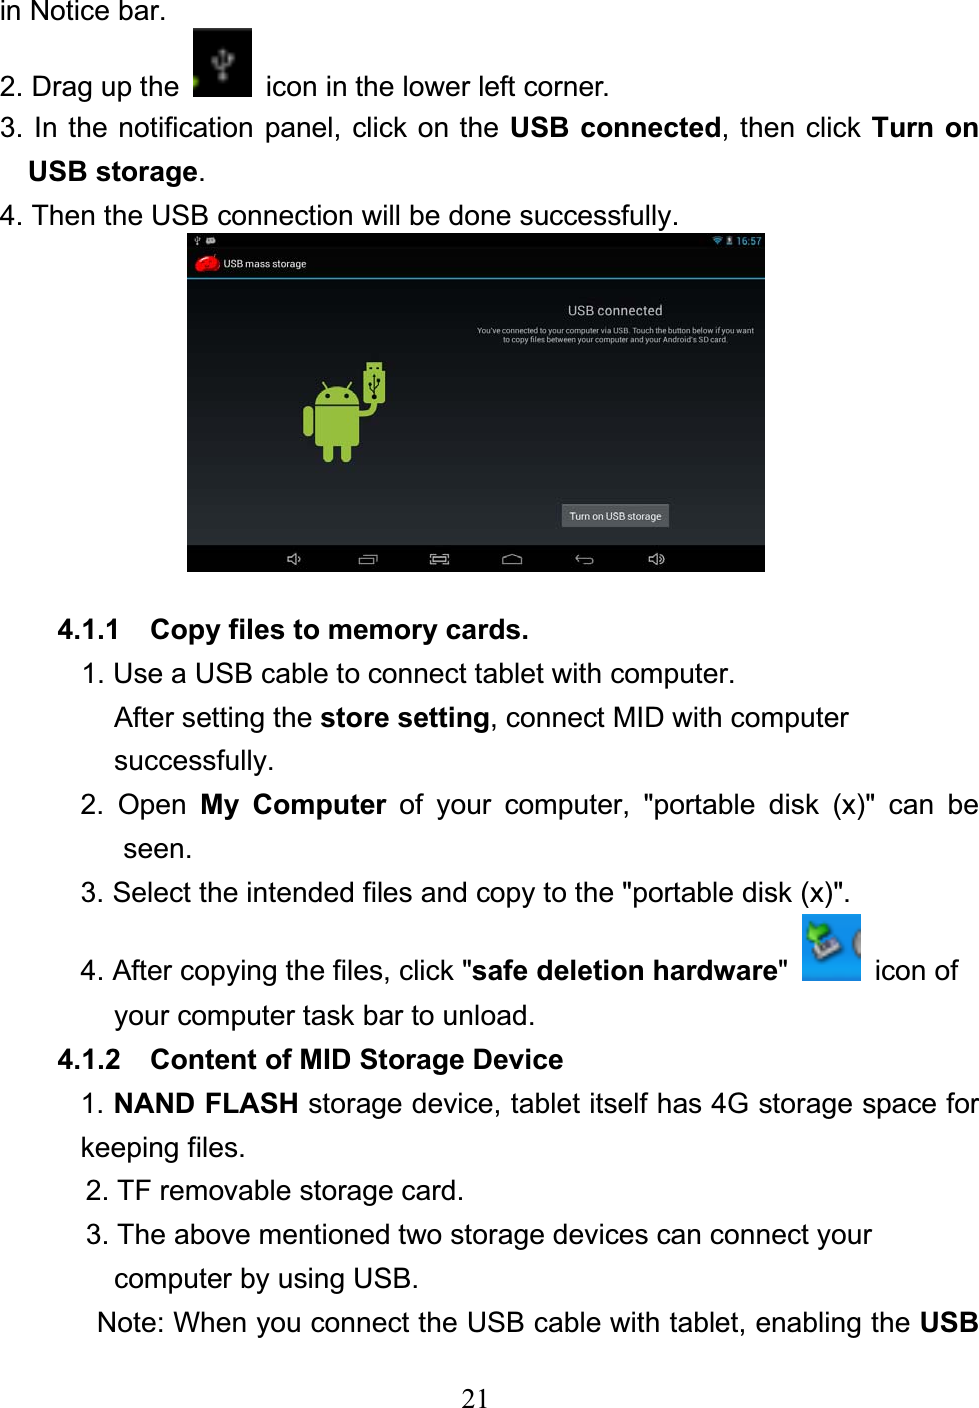 21in Notice bar. 2. Drag up the    icon in the lower left corner.   3. In the notification panel, click on the USB connected, then click Turn on USB storage.4. Then the USB connection will be done successfully. 4.1.1  Copy files to memory cards. 1. Use a USB cable to connect tablet with computer. After setting the store setting, connect MID with computer   successfully. 2. Open My Computer of your computer, &quot;portable disk (x)&quot; can be seen. 3. Select the intended files and copy to the &quot;portable disk (x)&quot;. 4. After copying the files, click &quot;safe deletion hardware&quot; icon of  your computer task bar to unload. 4.1.2  Content of MID Storage Device 1. NAND FLASH storage device, tablet itself has 4G storage space for keeping files. 2. TF removable storage card. 3. The above mentioned two storage devices can connect your   computer by using USB. Note: When you connect the USB cable with tablet, enabling the USB